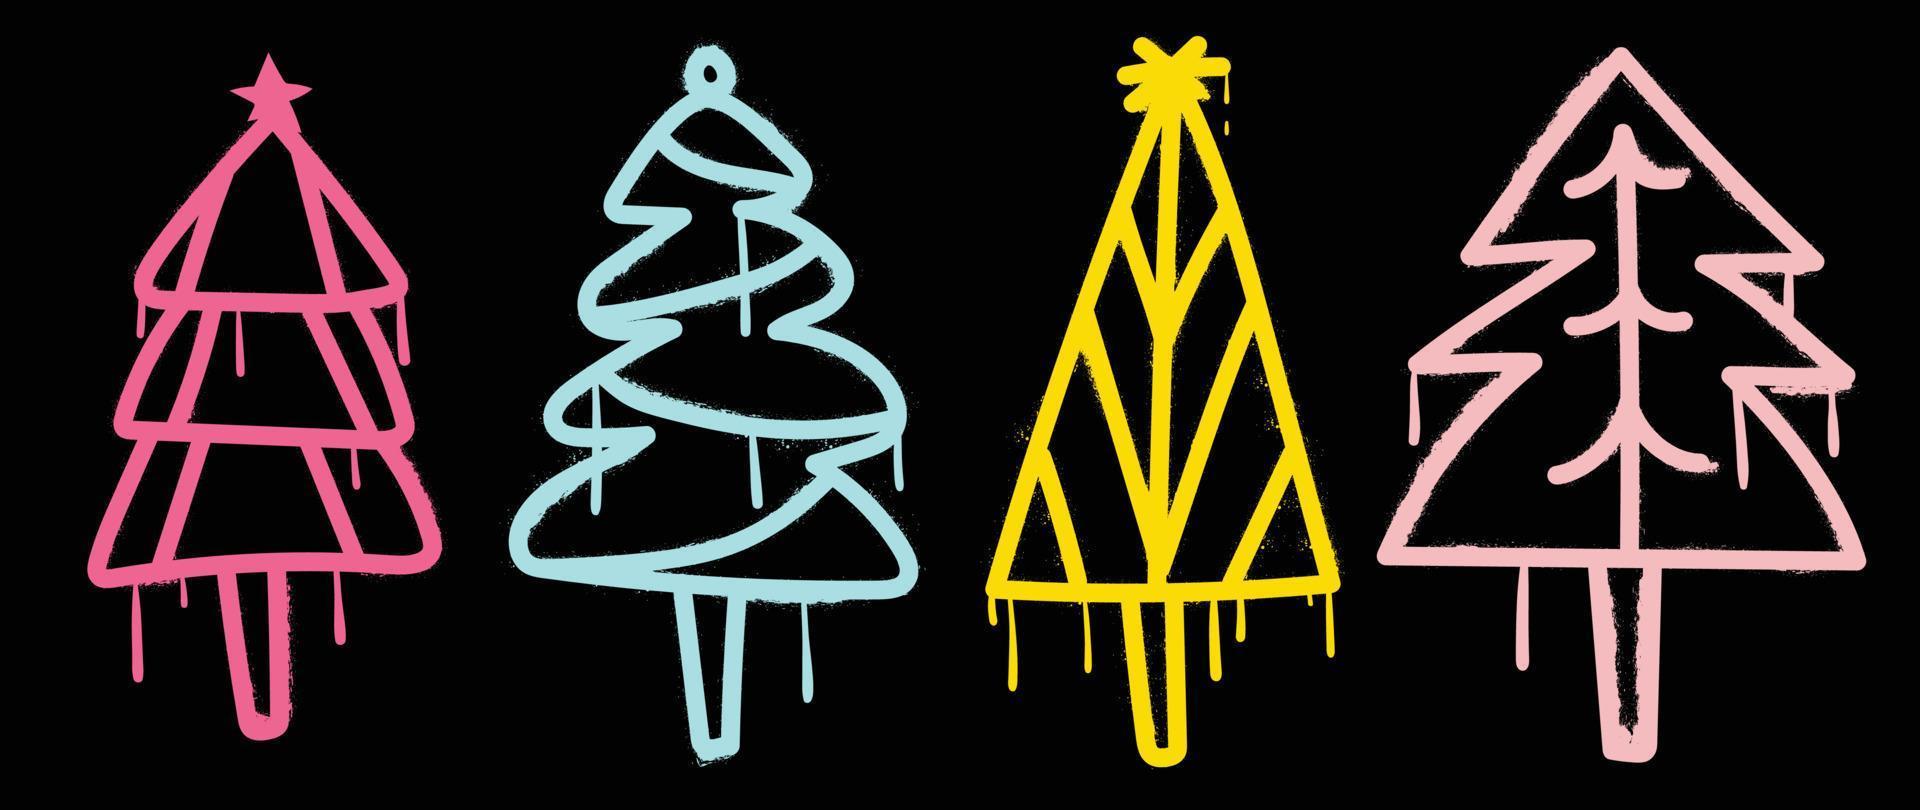 Set of christmas elements spray paint vector. Graffiti, grunge, glowing elements of spray paint christmas trees, ink flow on black background. Design illustration for decoration, card, sticker. vector